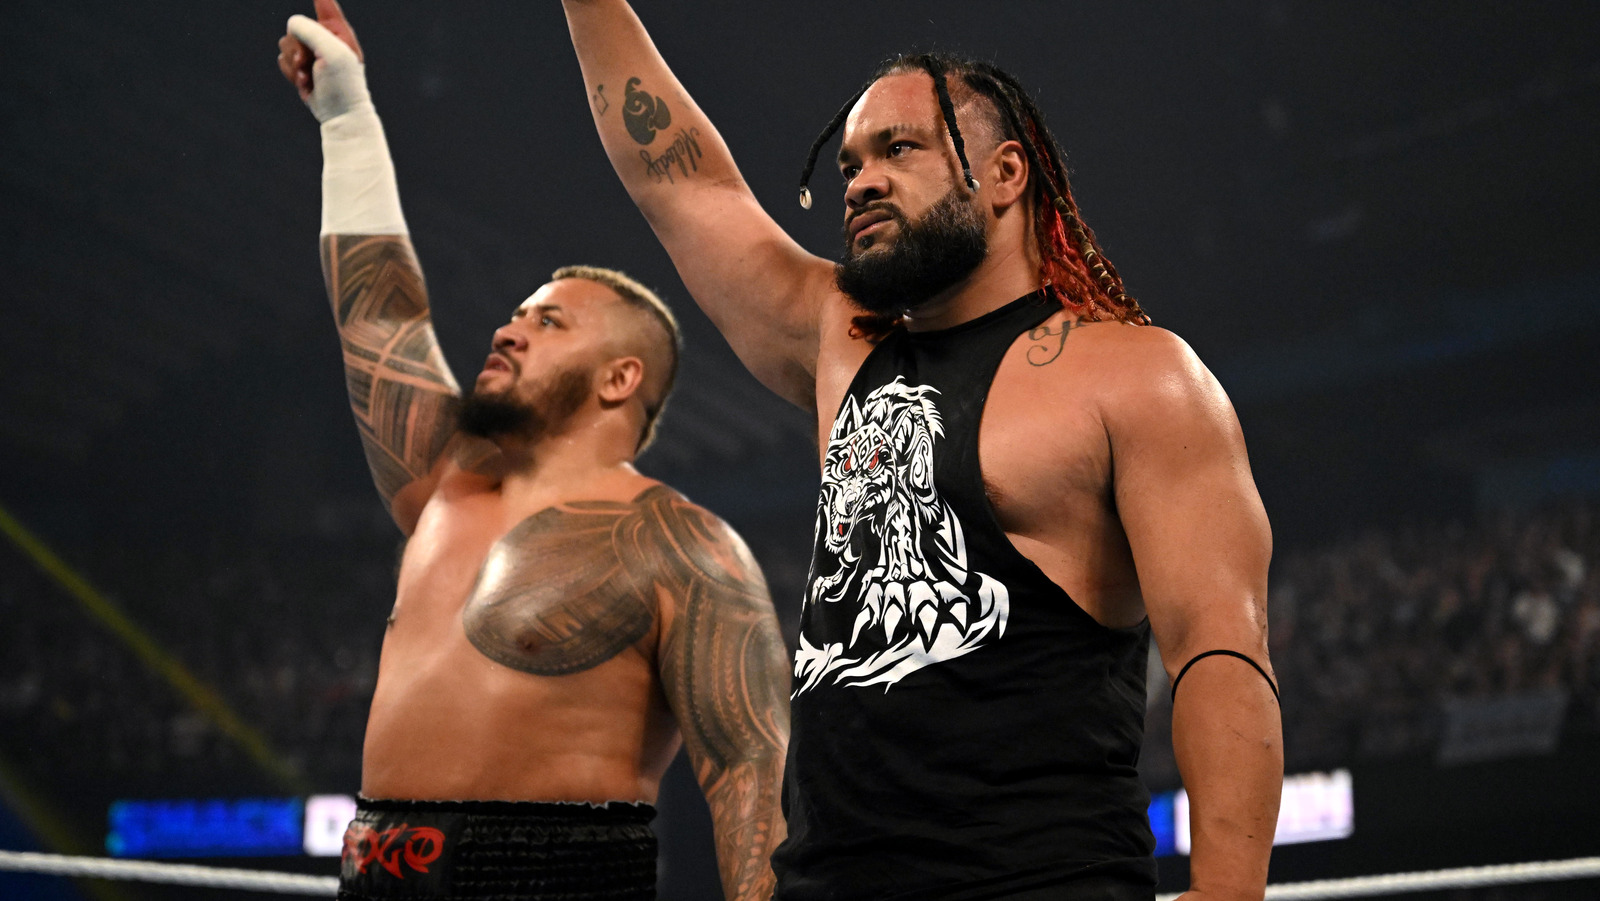 Bully Ray Noticed One Small Detail About Jacob Fatu's Debut On WWE SmackDown